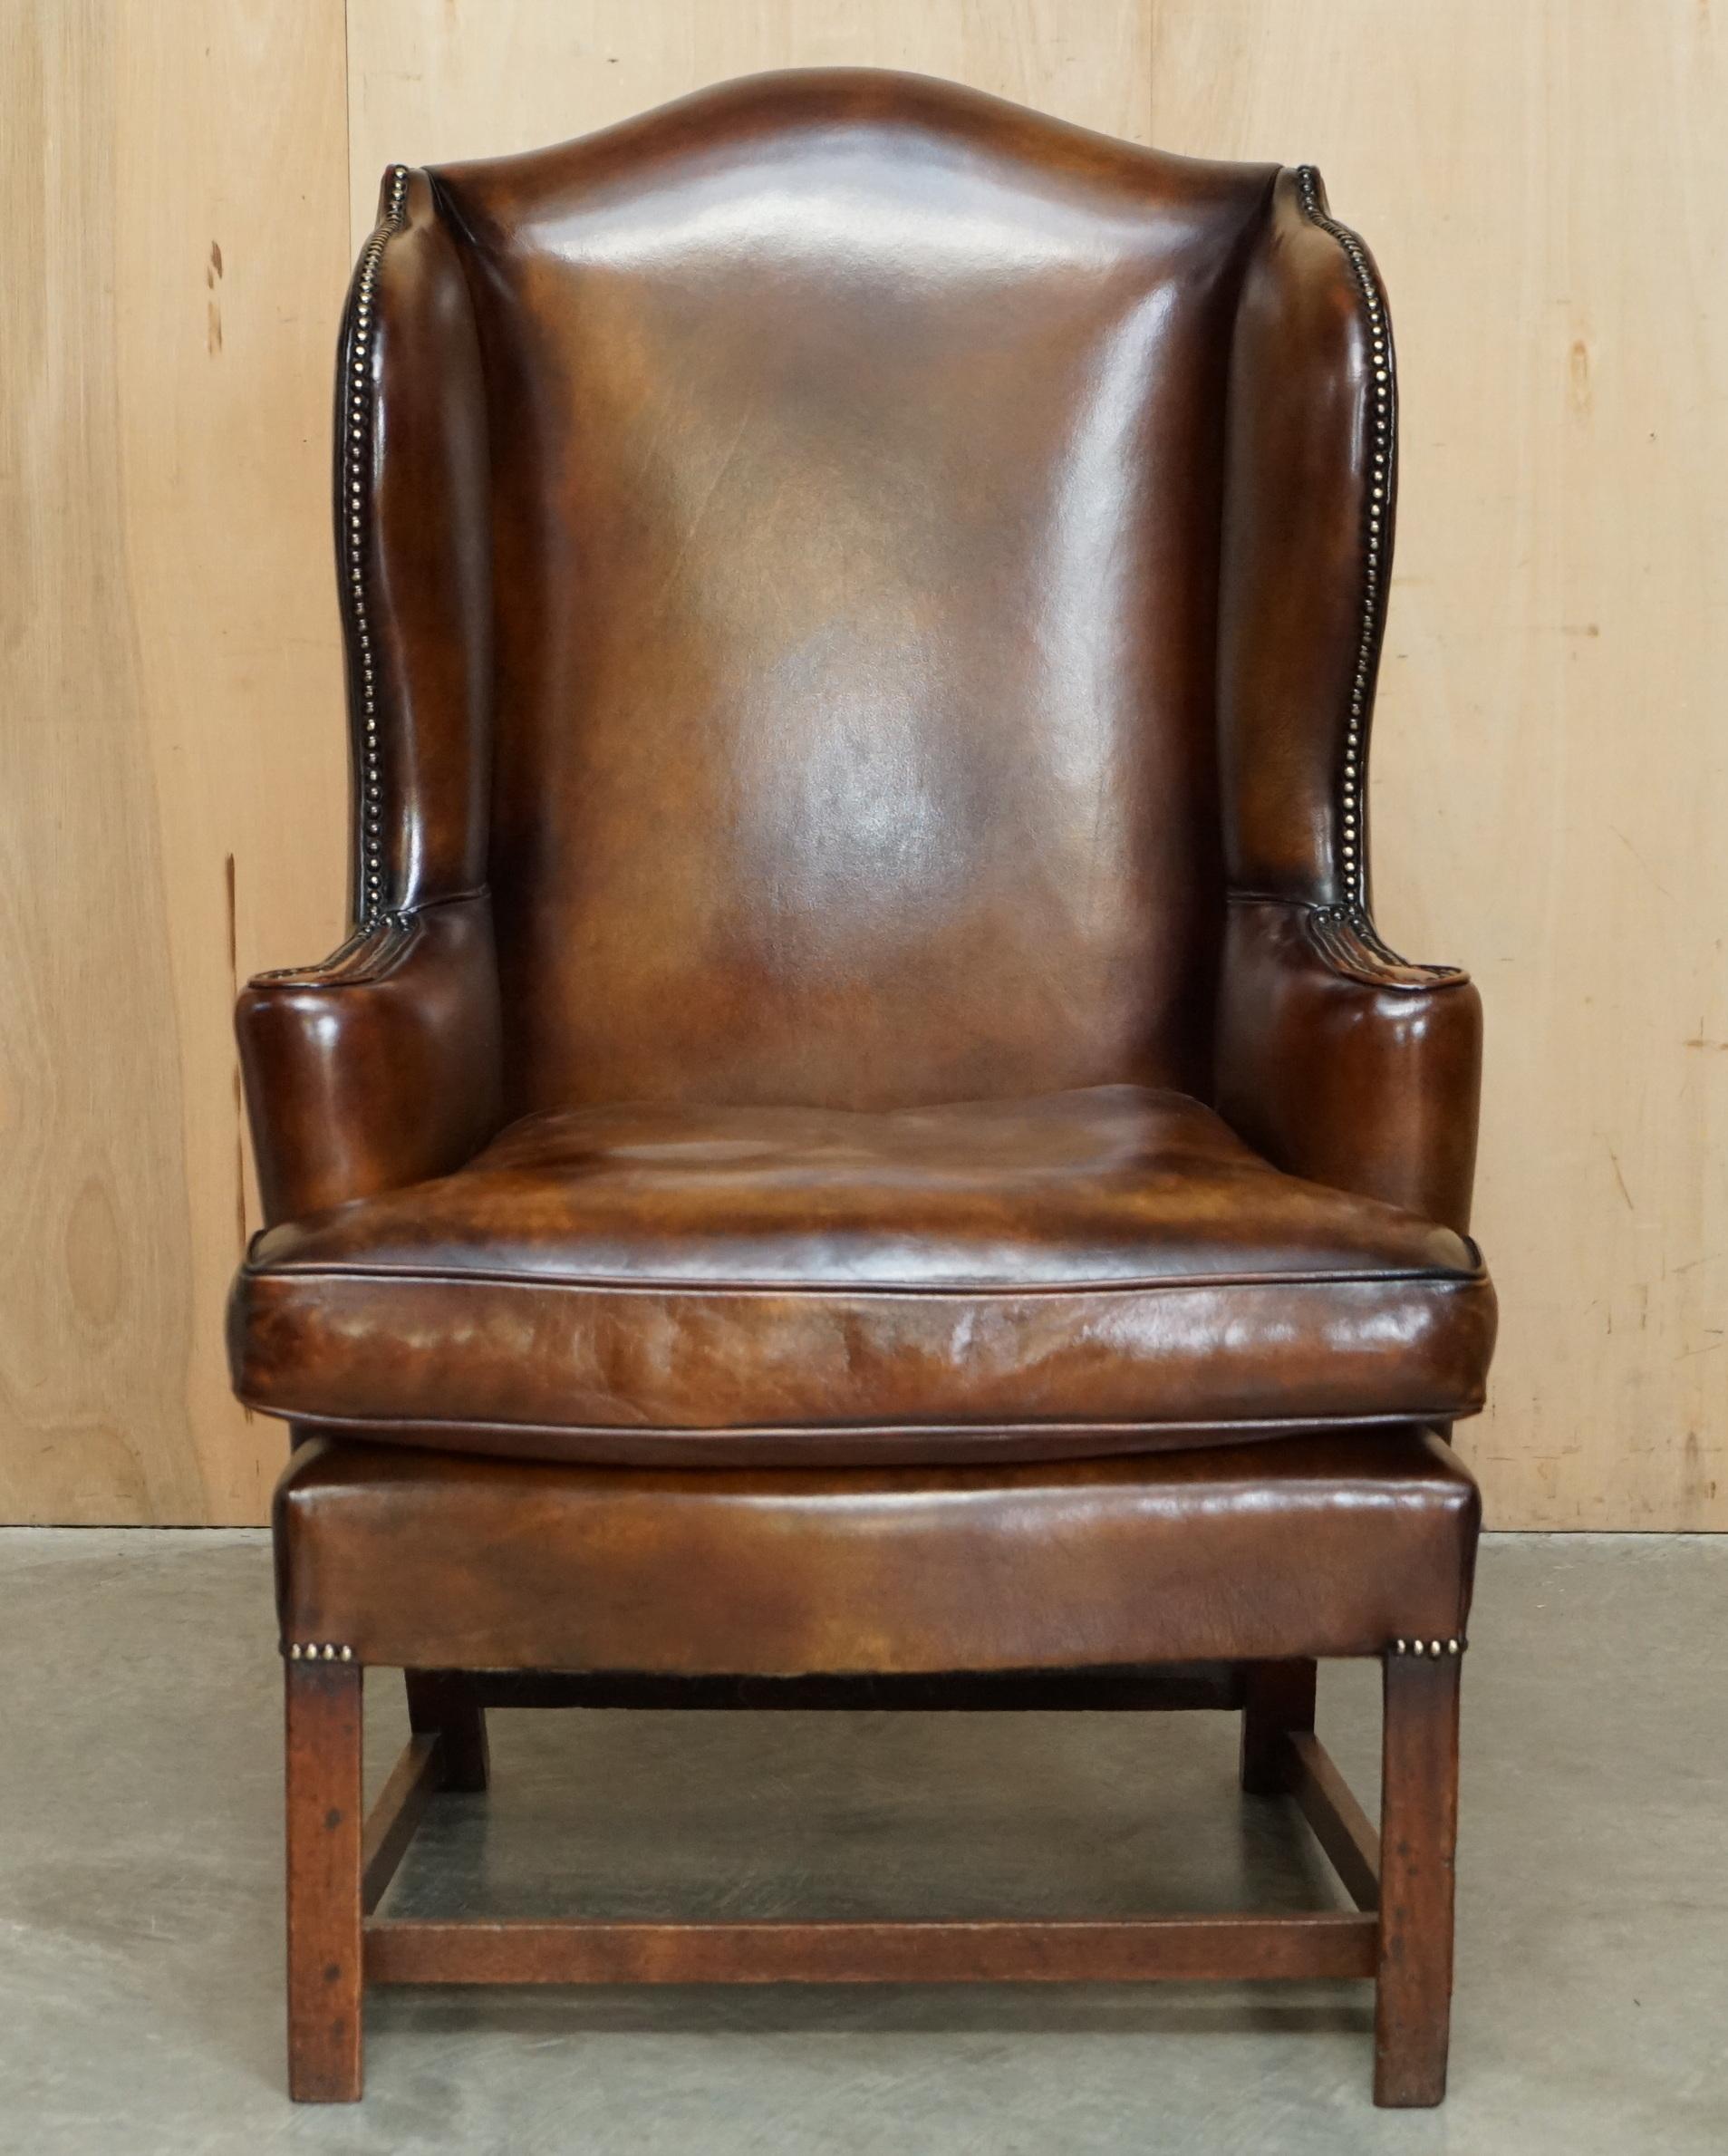 Royal House Antiques

Royal House Antiques is delighted to offer for sale this stunning, fully restored, hand dyed, very rare George III circa 1820 Wingback armchair

Please note the delivery fee listed is just a guide, it covers within the M25 only